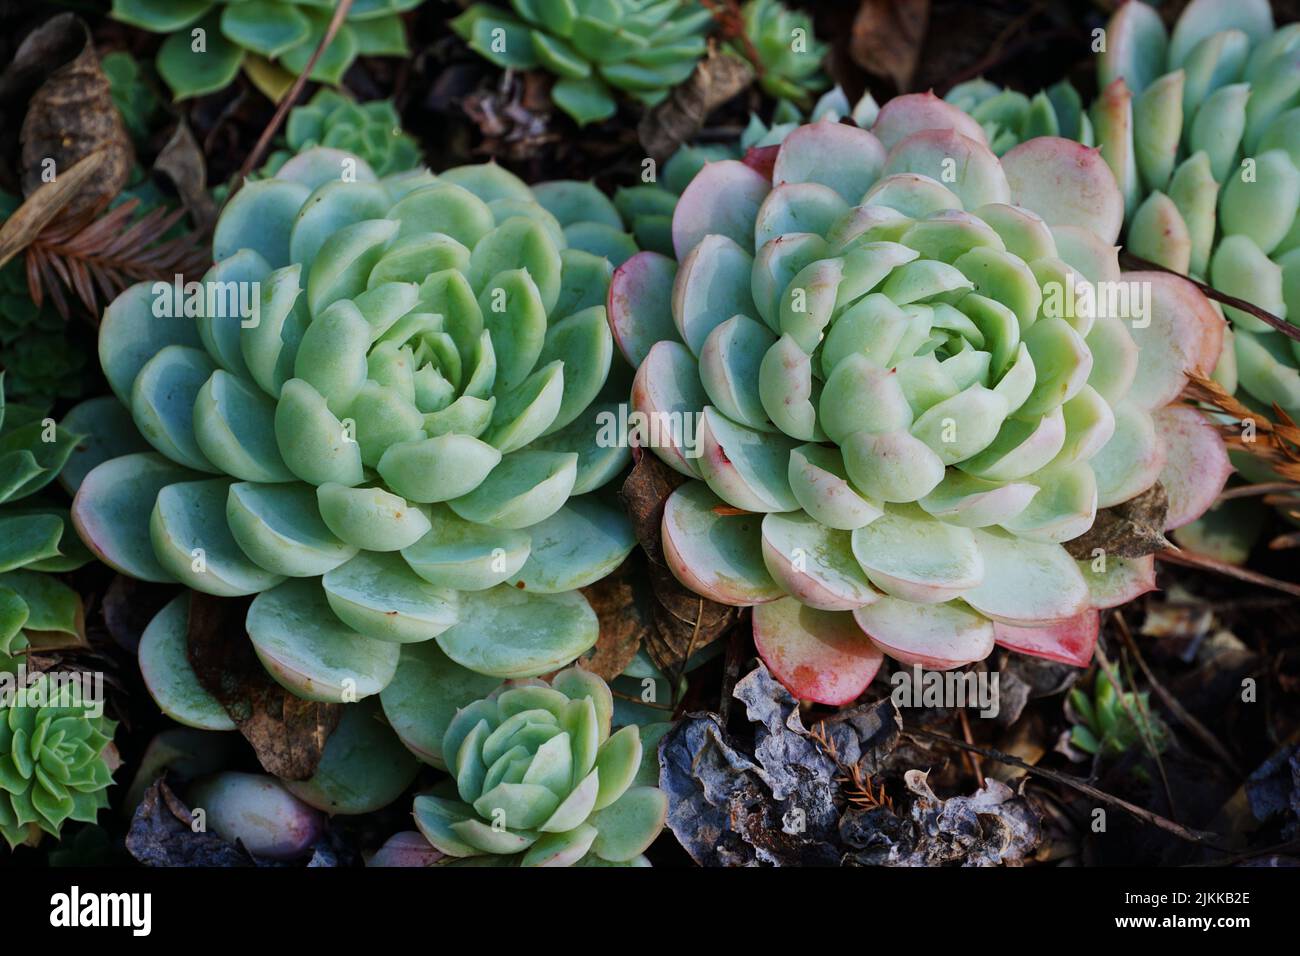 A scenic view of beautiful Echeveria flowering plants in a garden Stock Photo